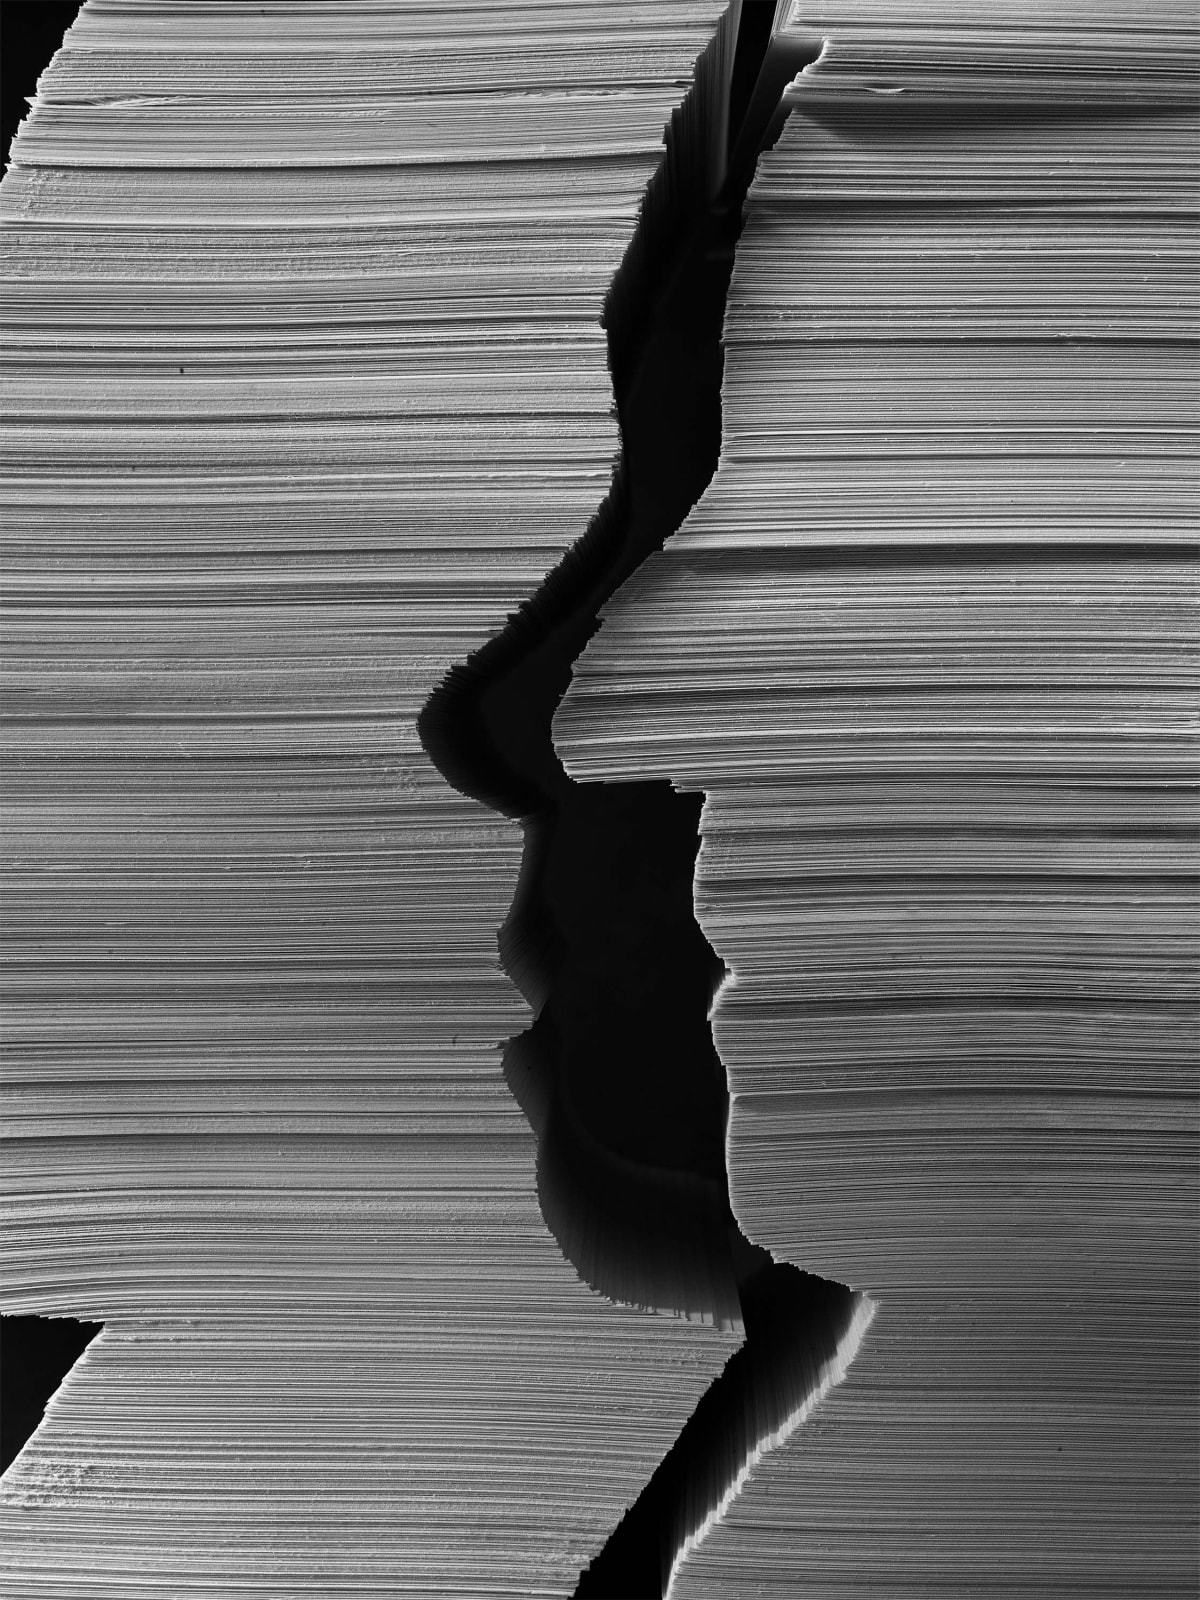 Abelardo Morell Paper Marriage stacks of paper in shape of silhouettes of man and woman artist and his wife Lisa